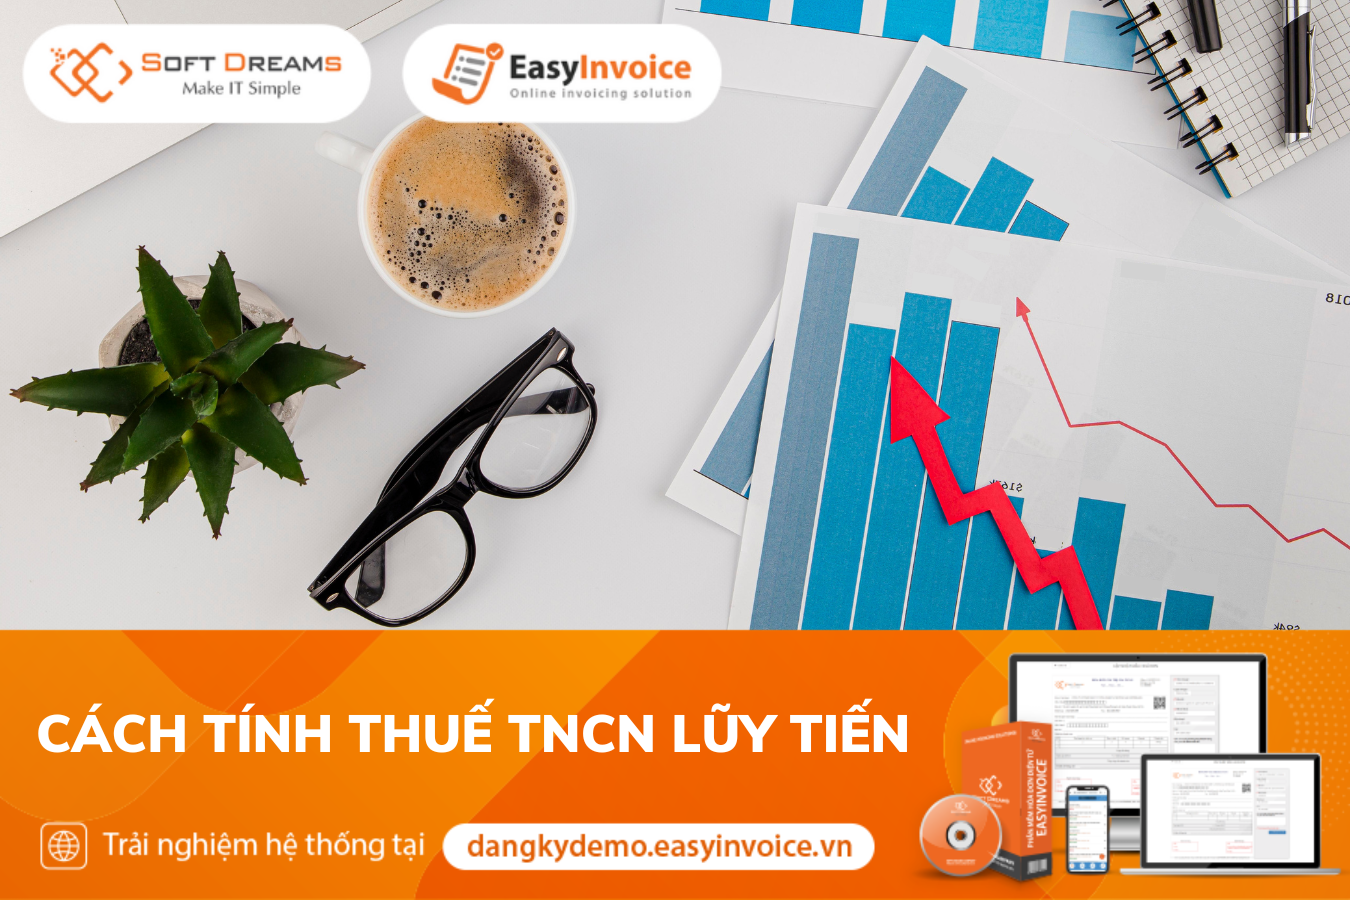 cach-tinh-thue-tncn-luy-tien